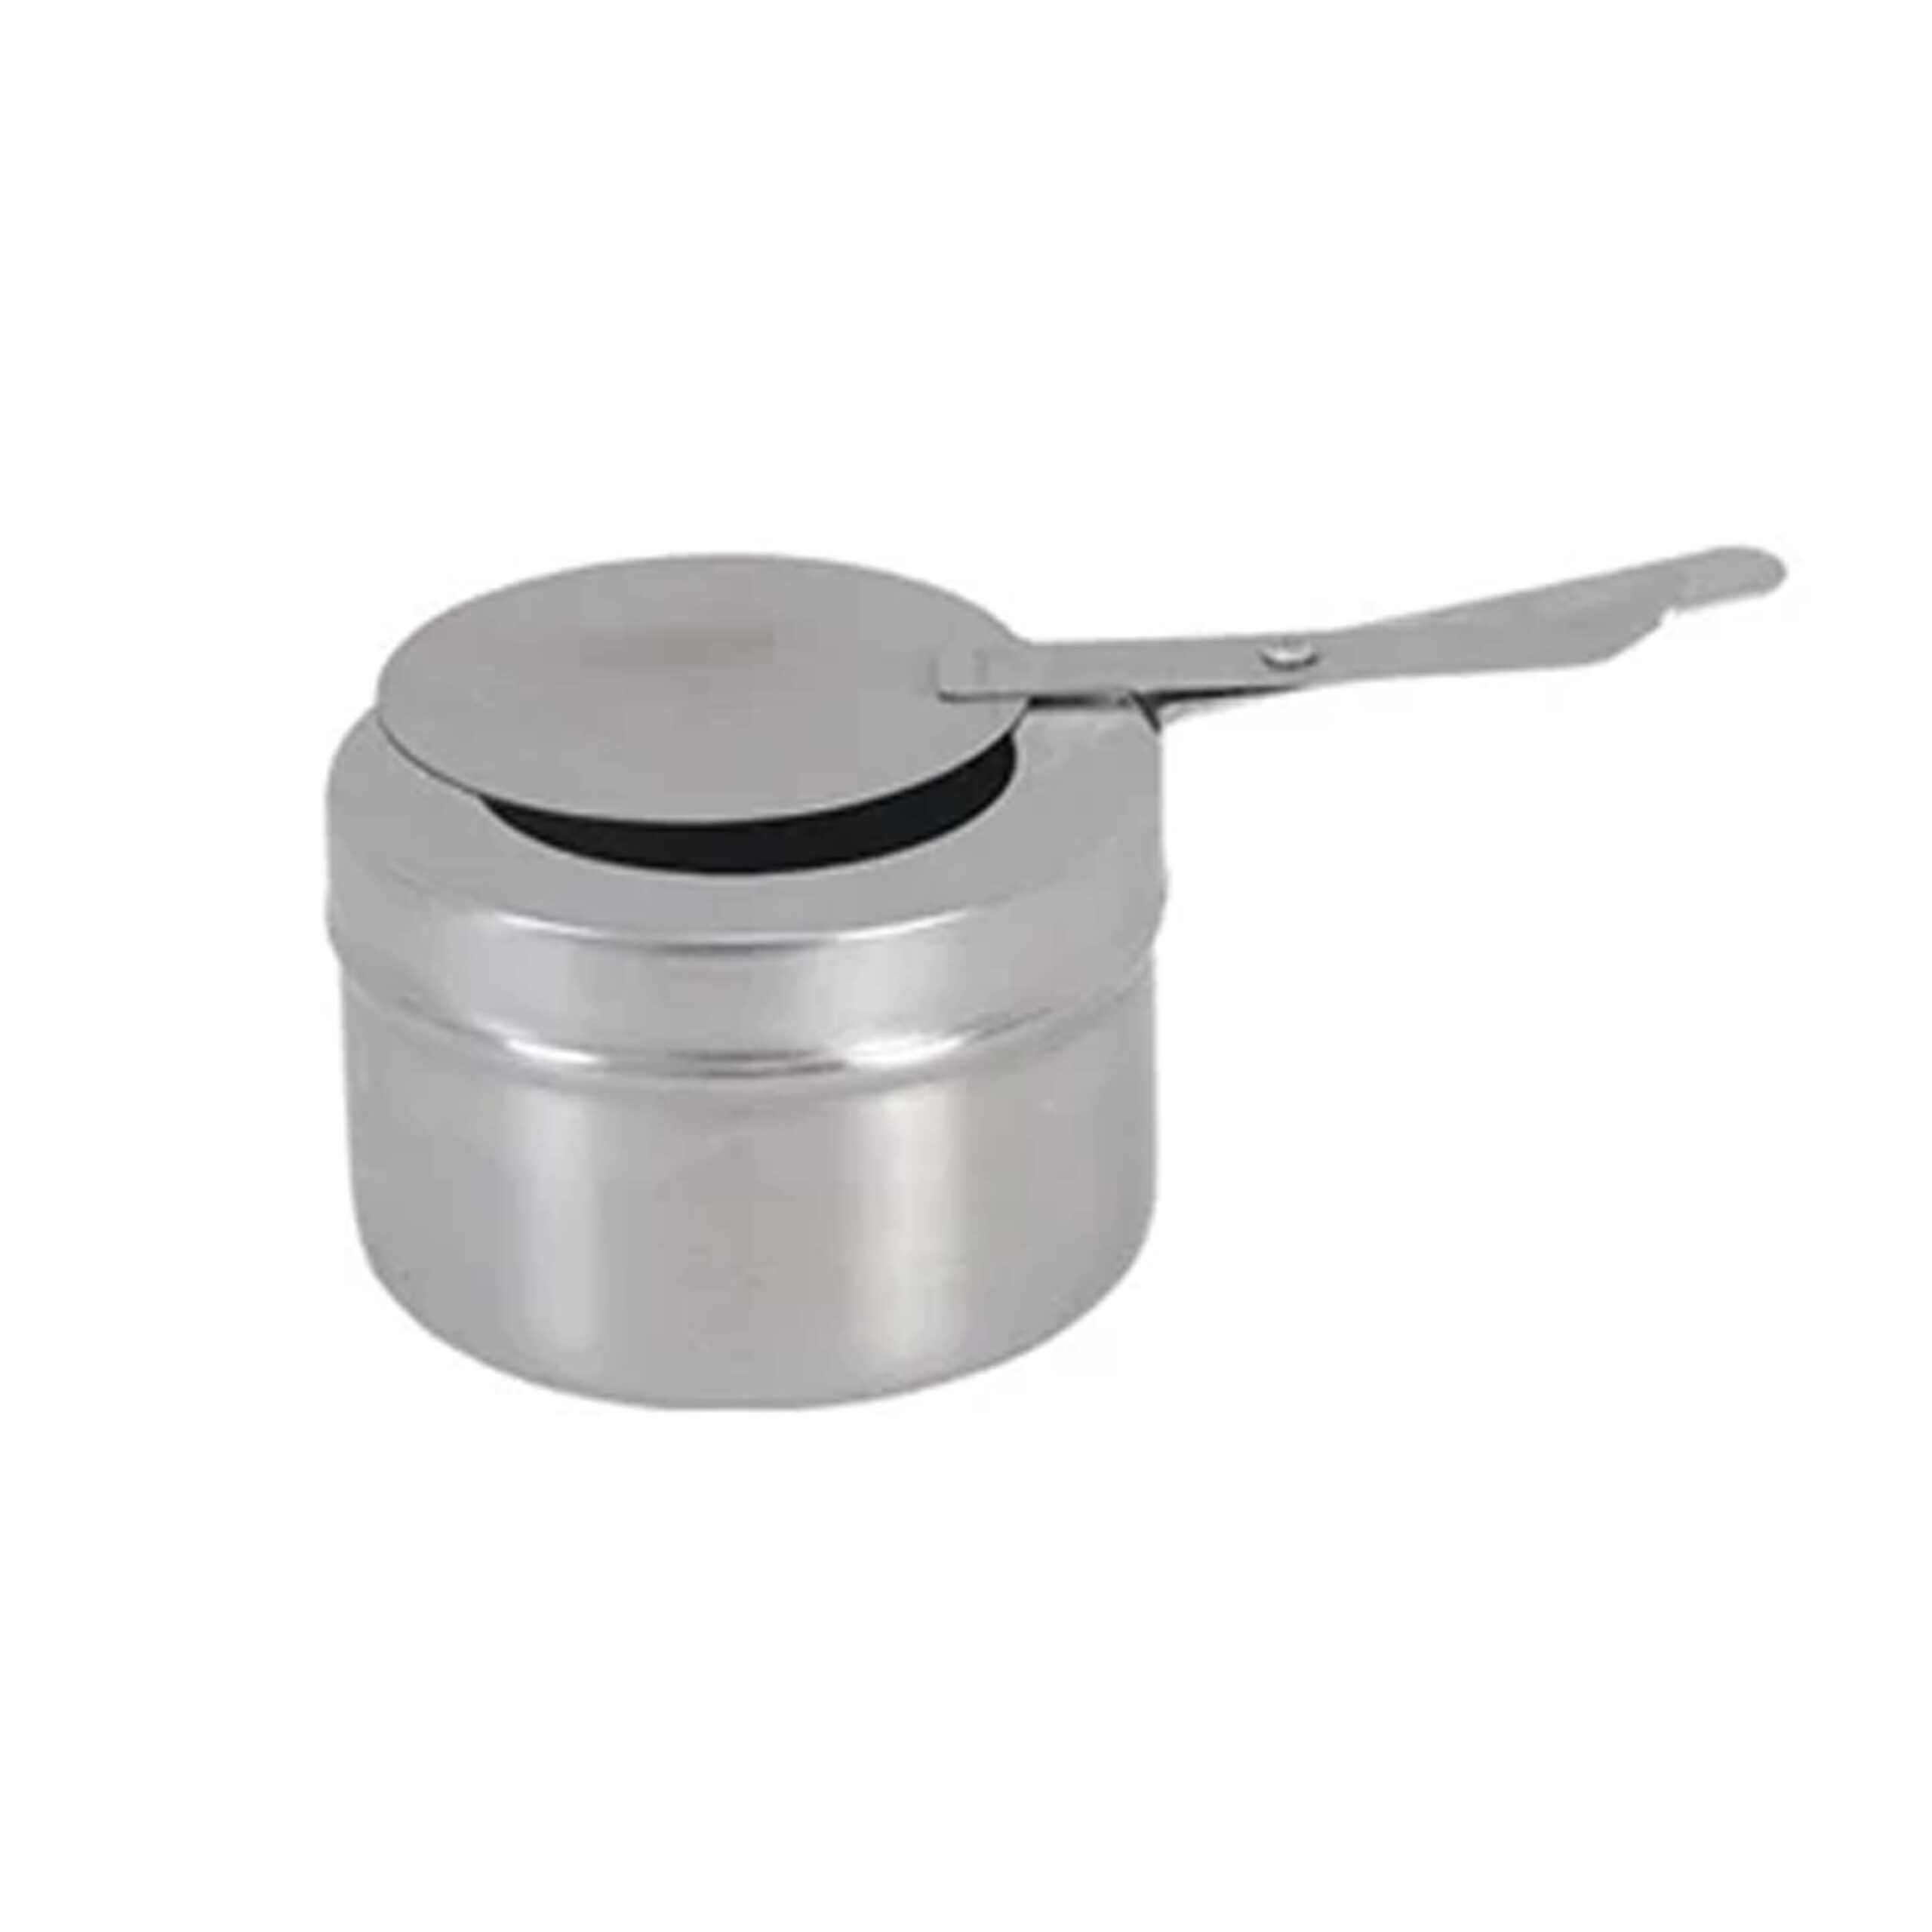 STAINLESS STEEL
CHAFFING FUEL
HOLDER WITH LID